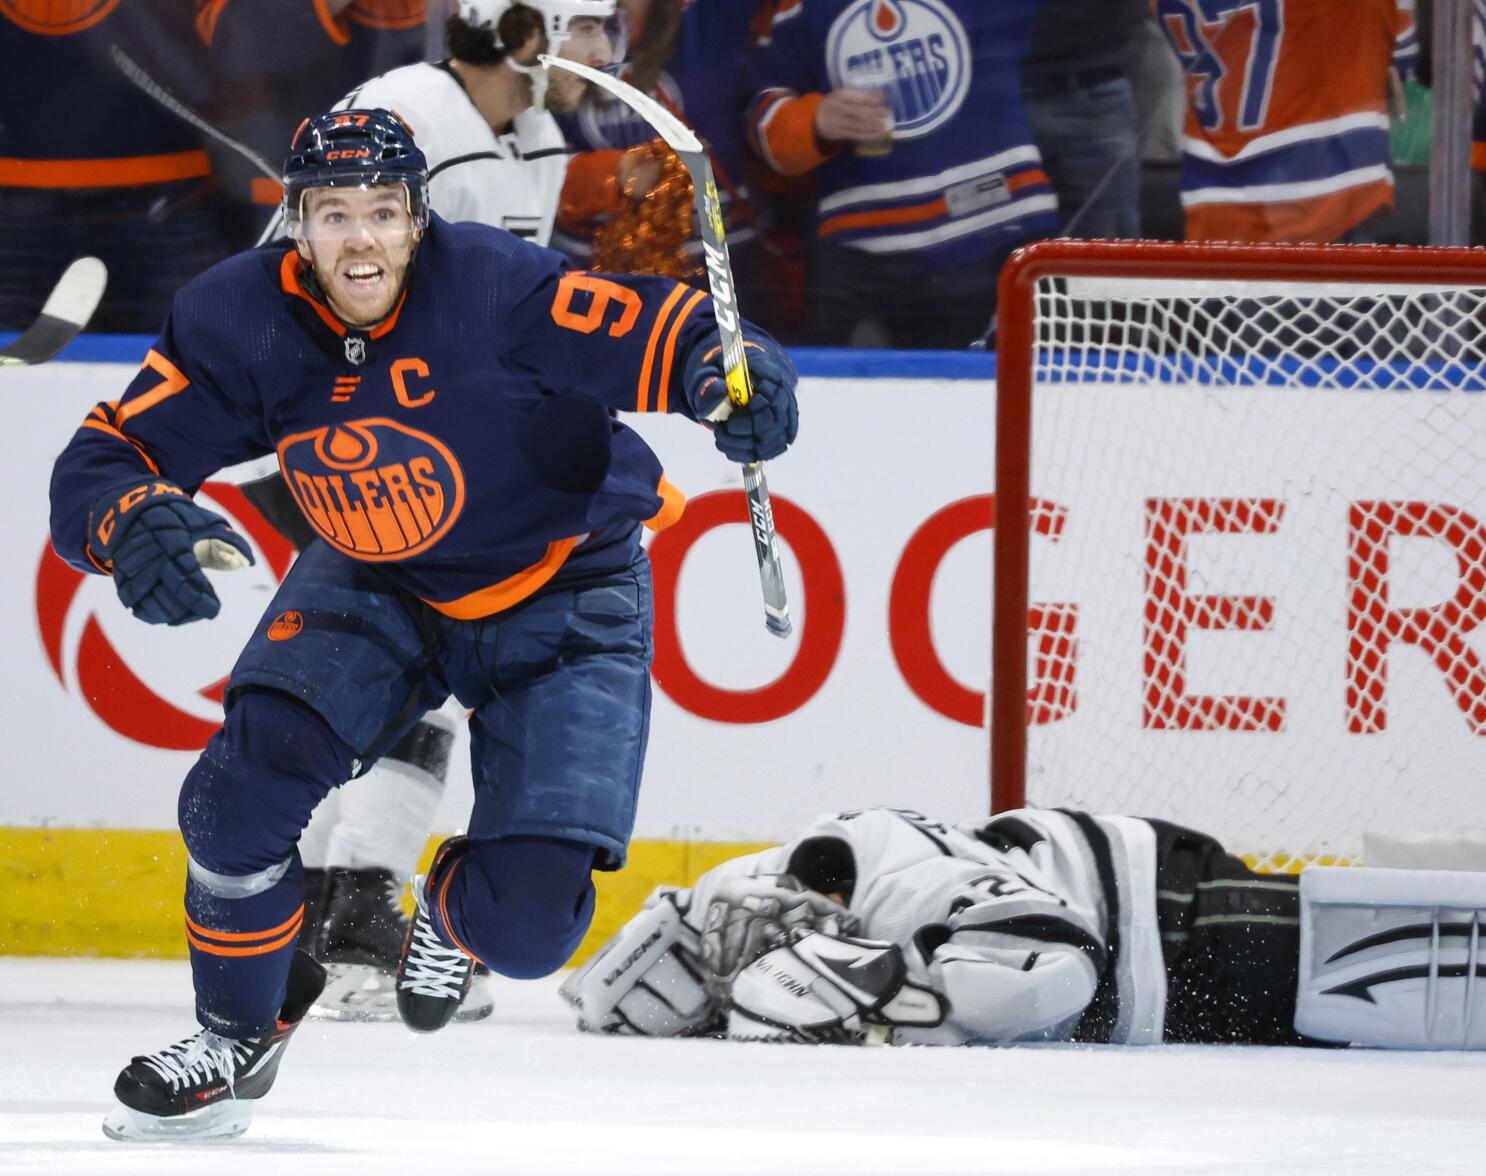 Woodcroft: McDavid's will to win inspiring Oilers